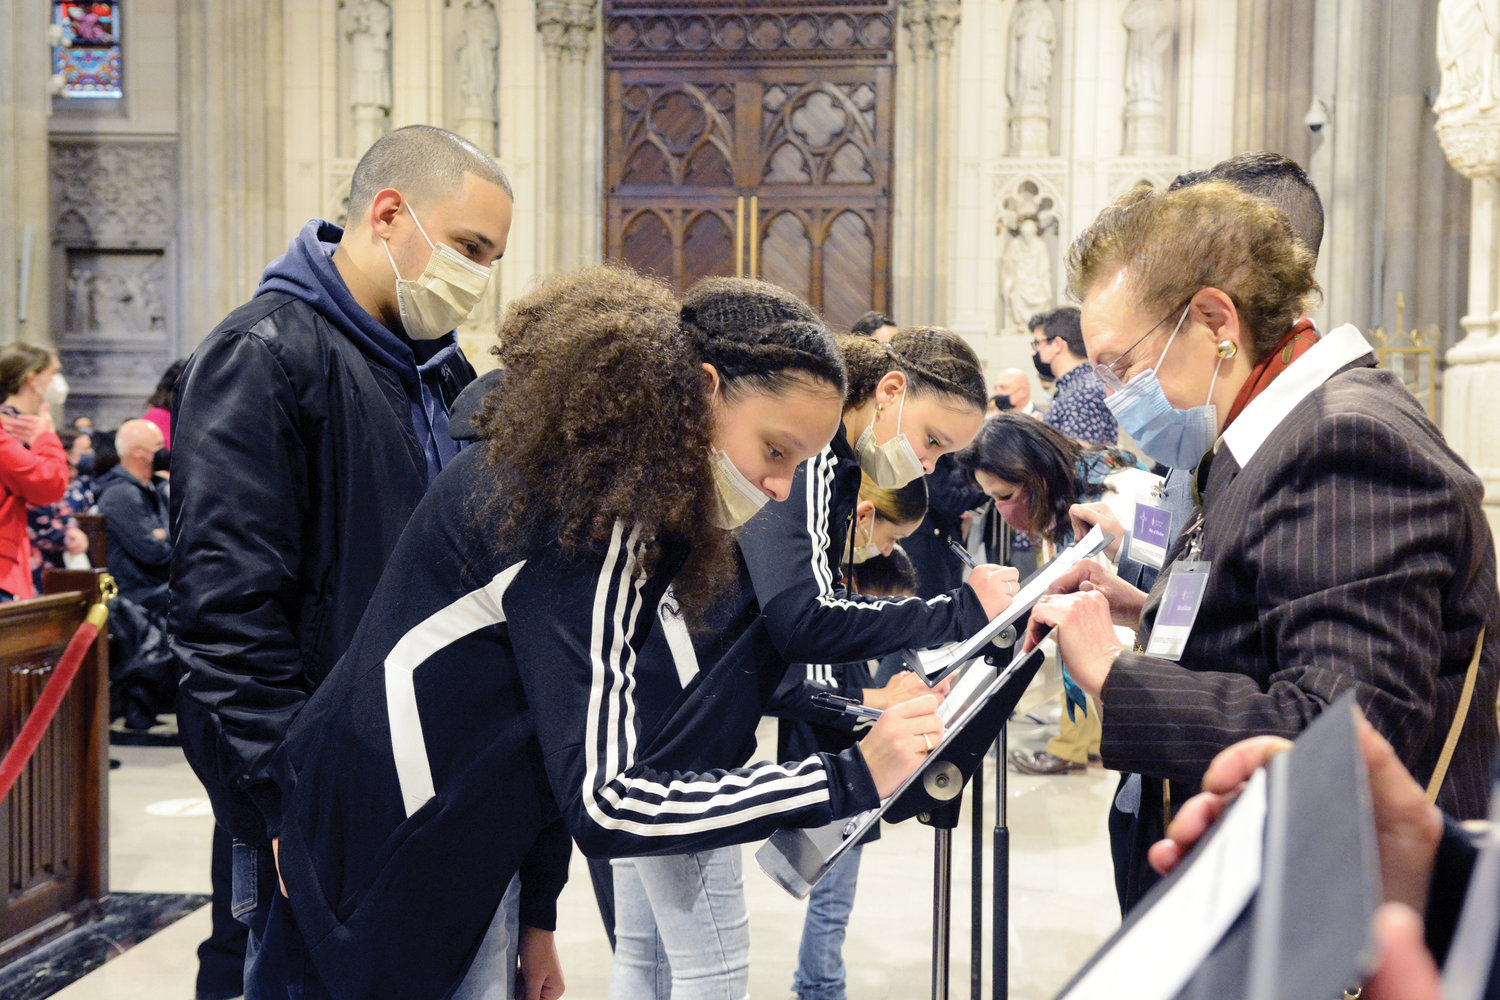 FAITHFUL STEP—Catechumens sign the Book of the Elect during the March 6 Rite of Election at St. Patrick’s Cathedral. They are preparing to enter the Catholic Church in their parishes at the Easter Vigil, April 16, when they will receive the sacraments of initiation. Full coverage on Page 3.